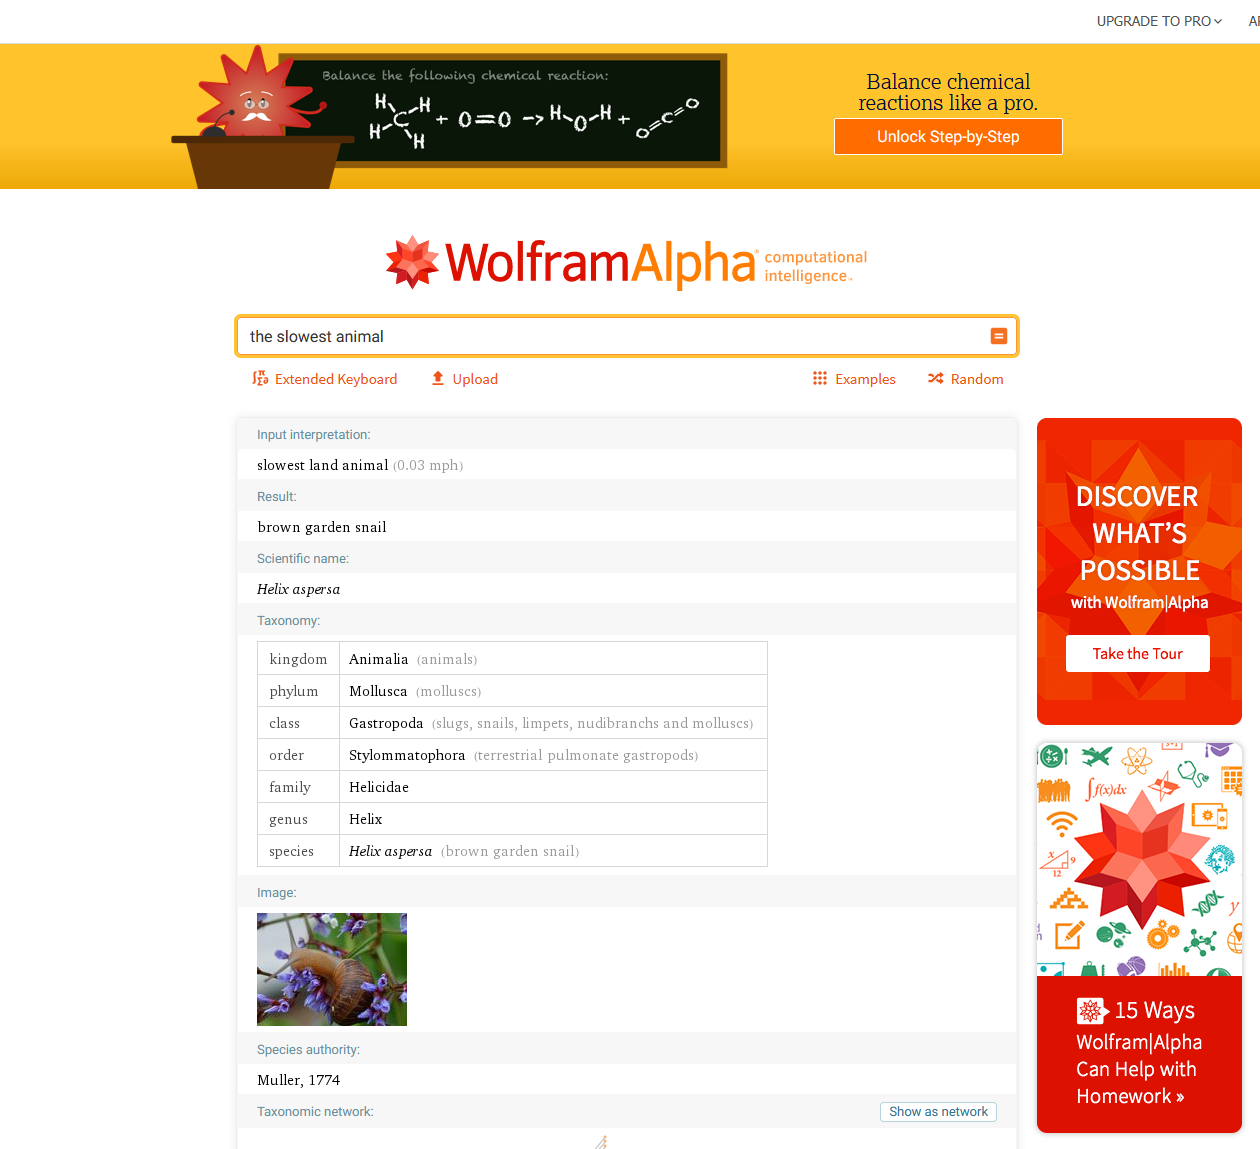 Wolfram Alpha search for slowest animal